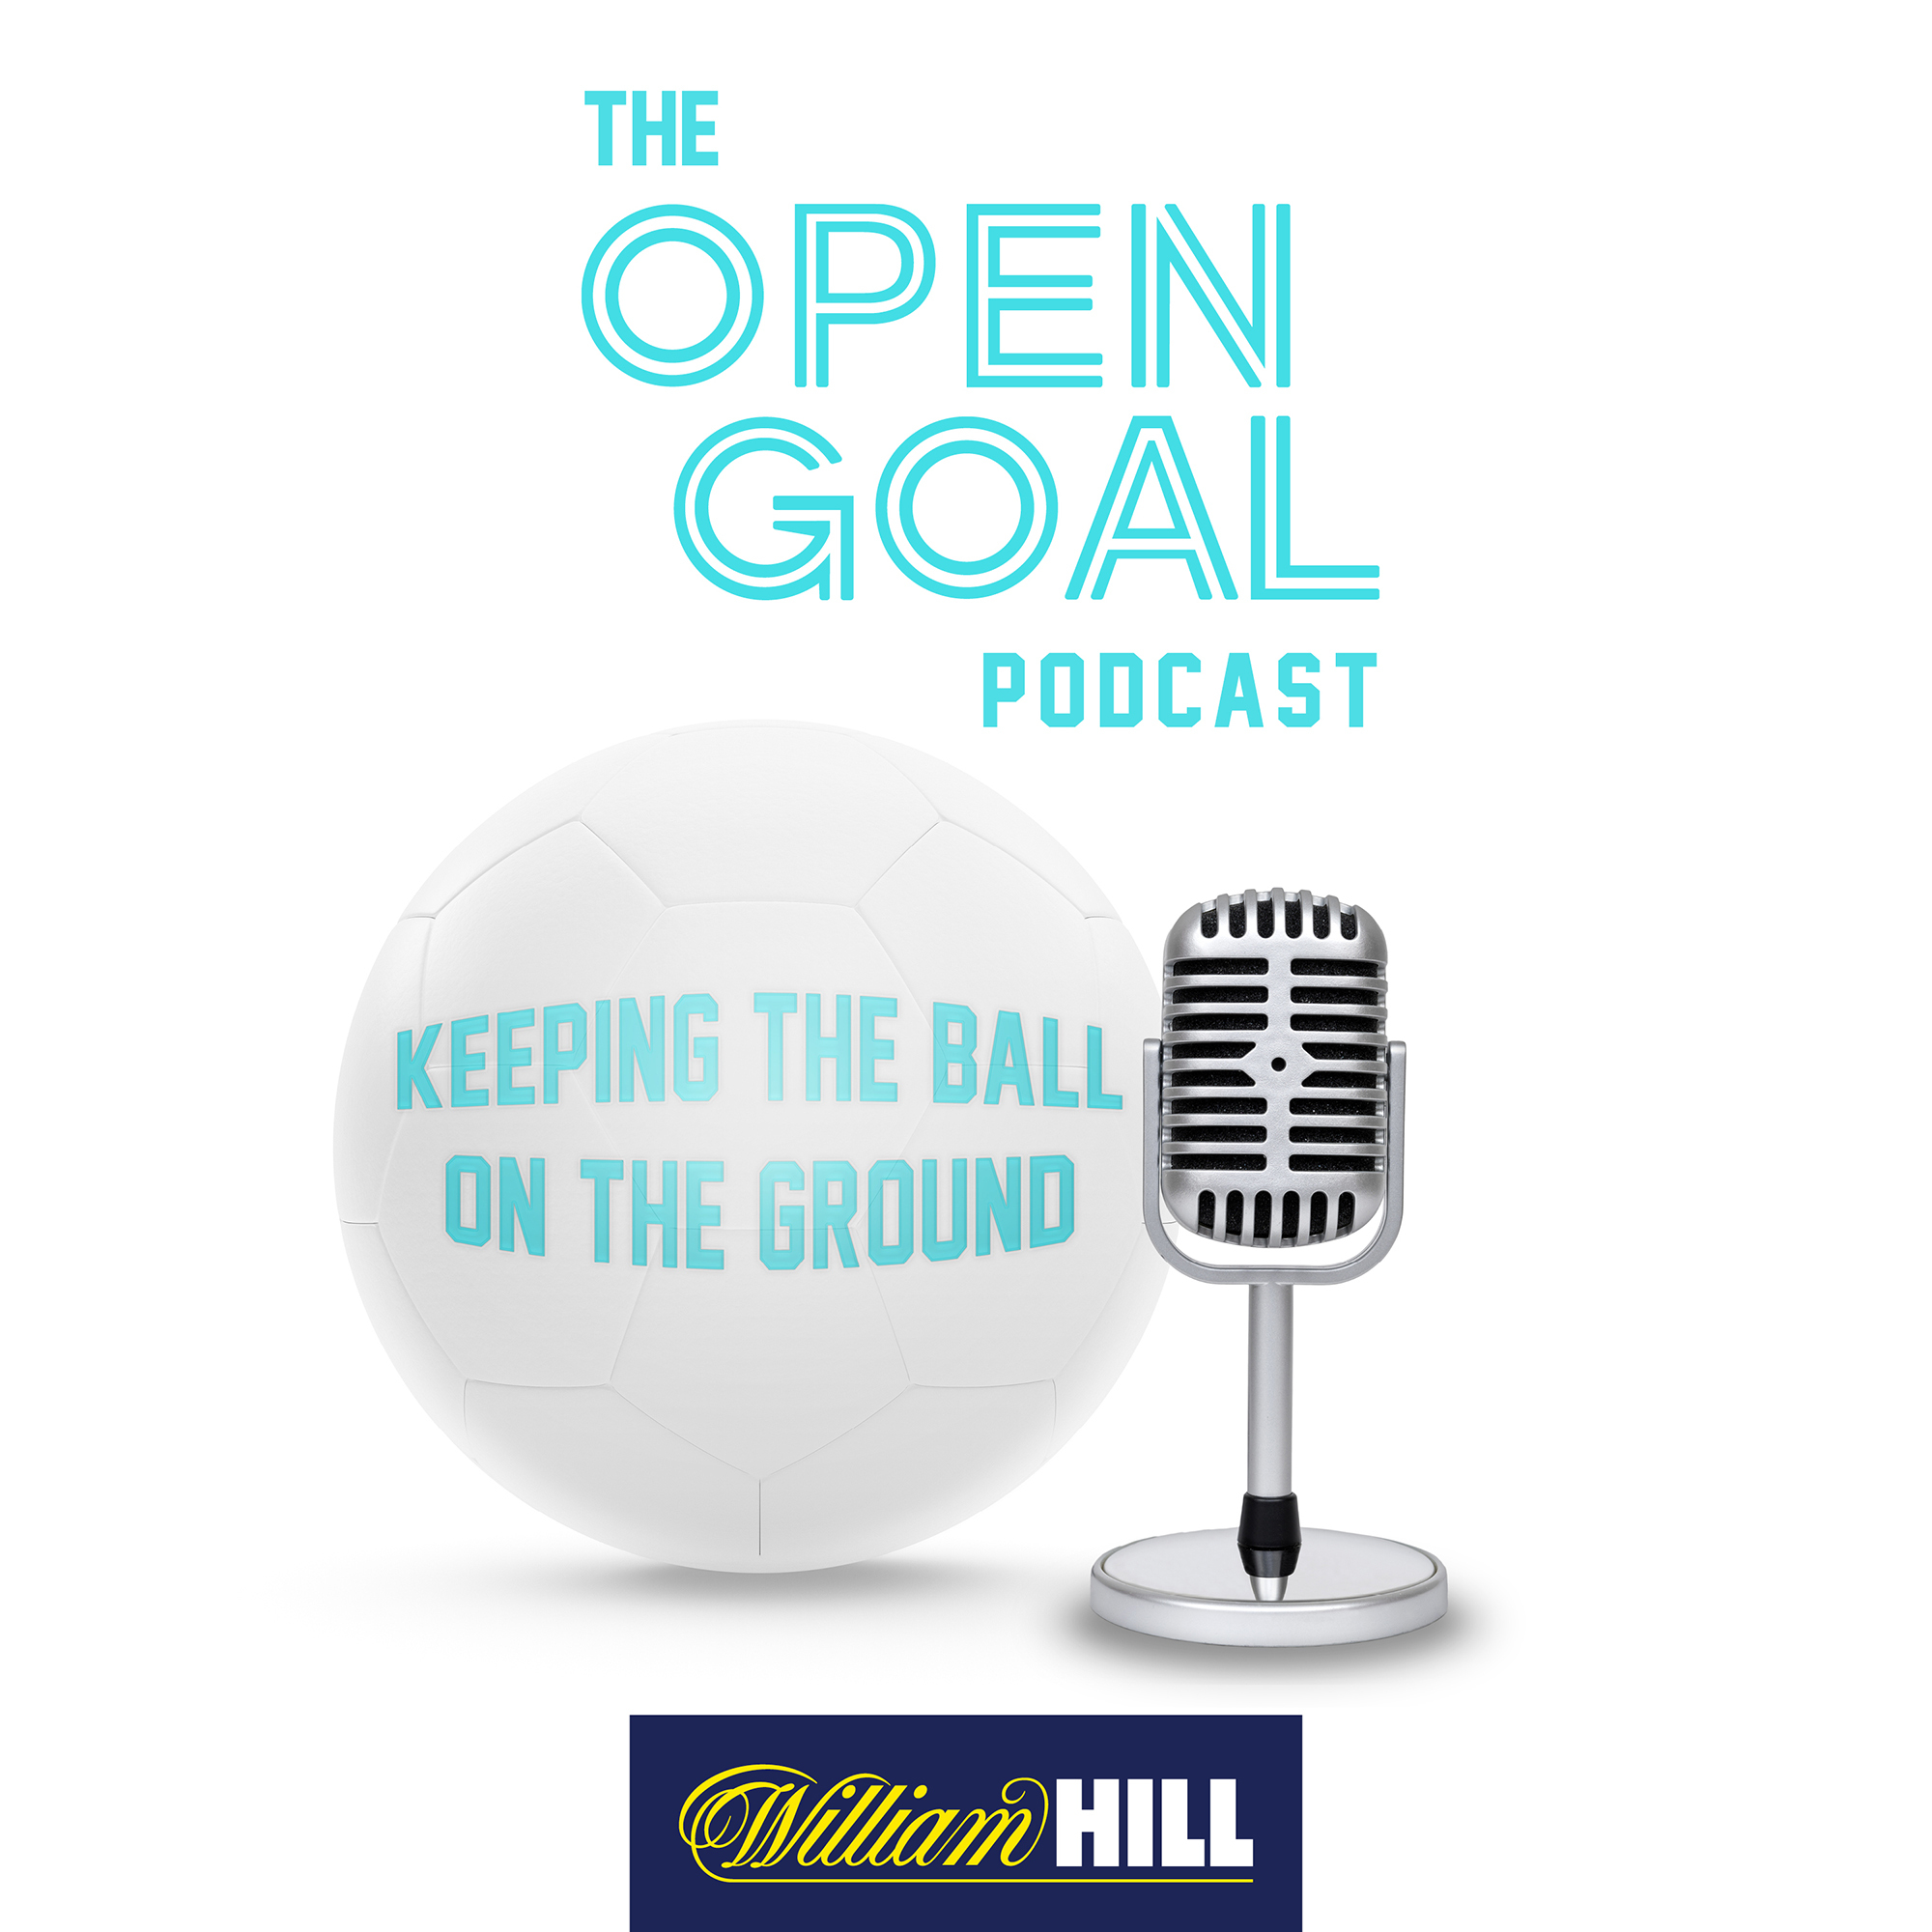 Keeping the Ball on the Ground - 2019/20 SPFL Season Preview! 